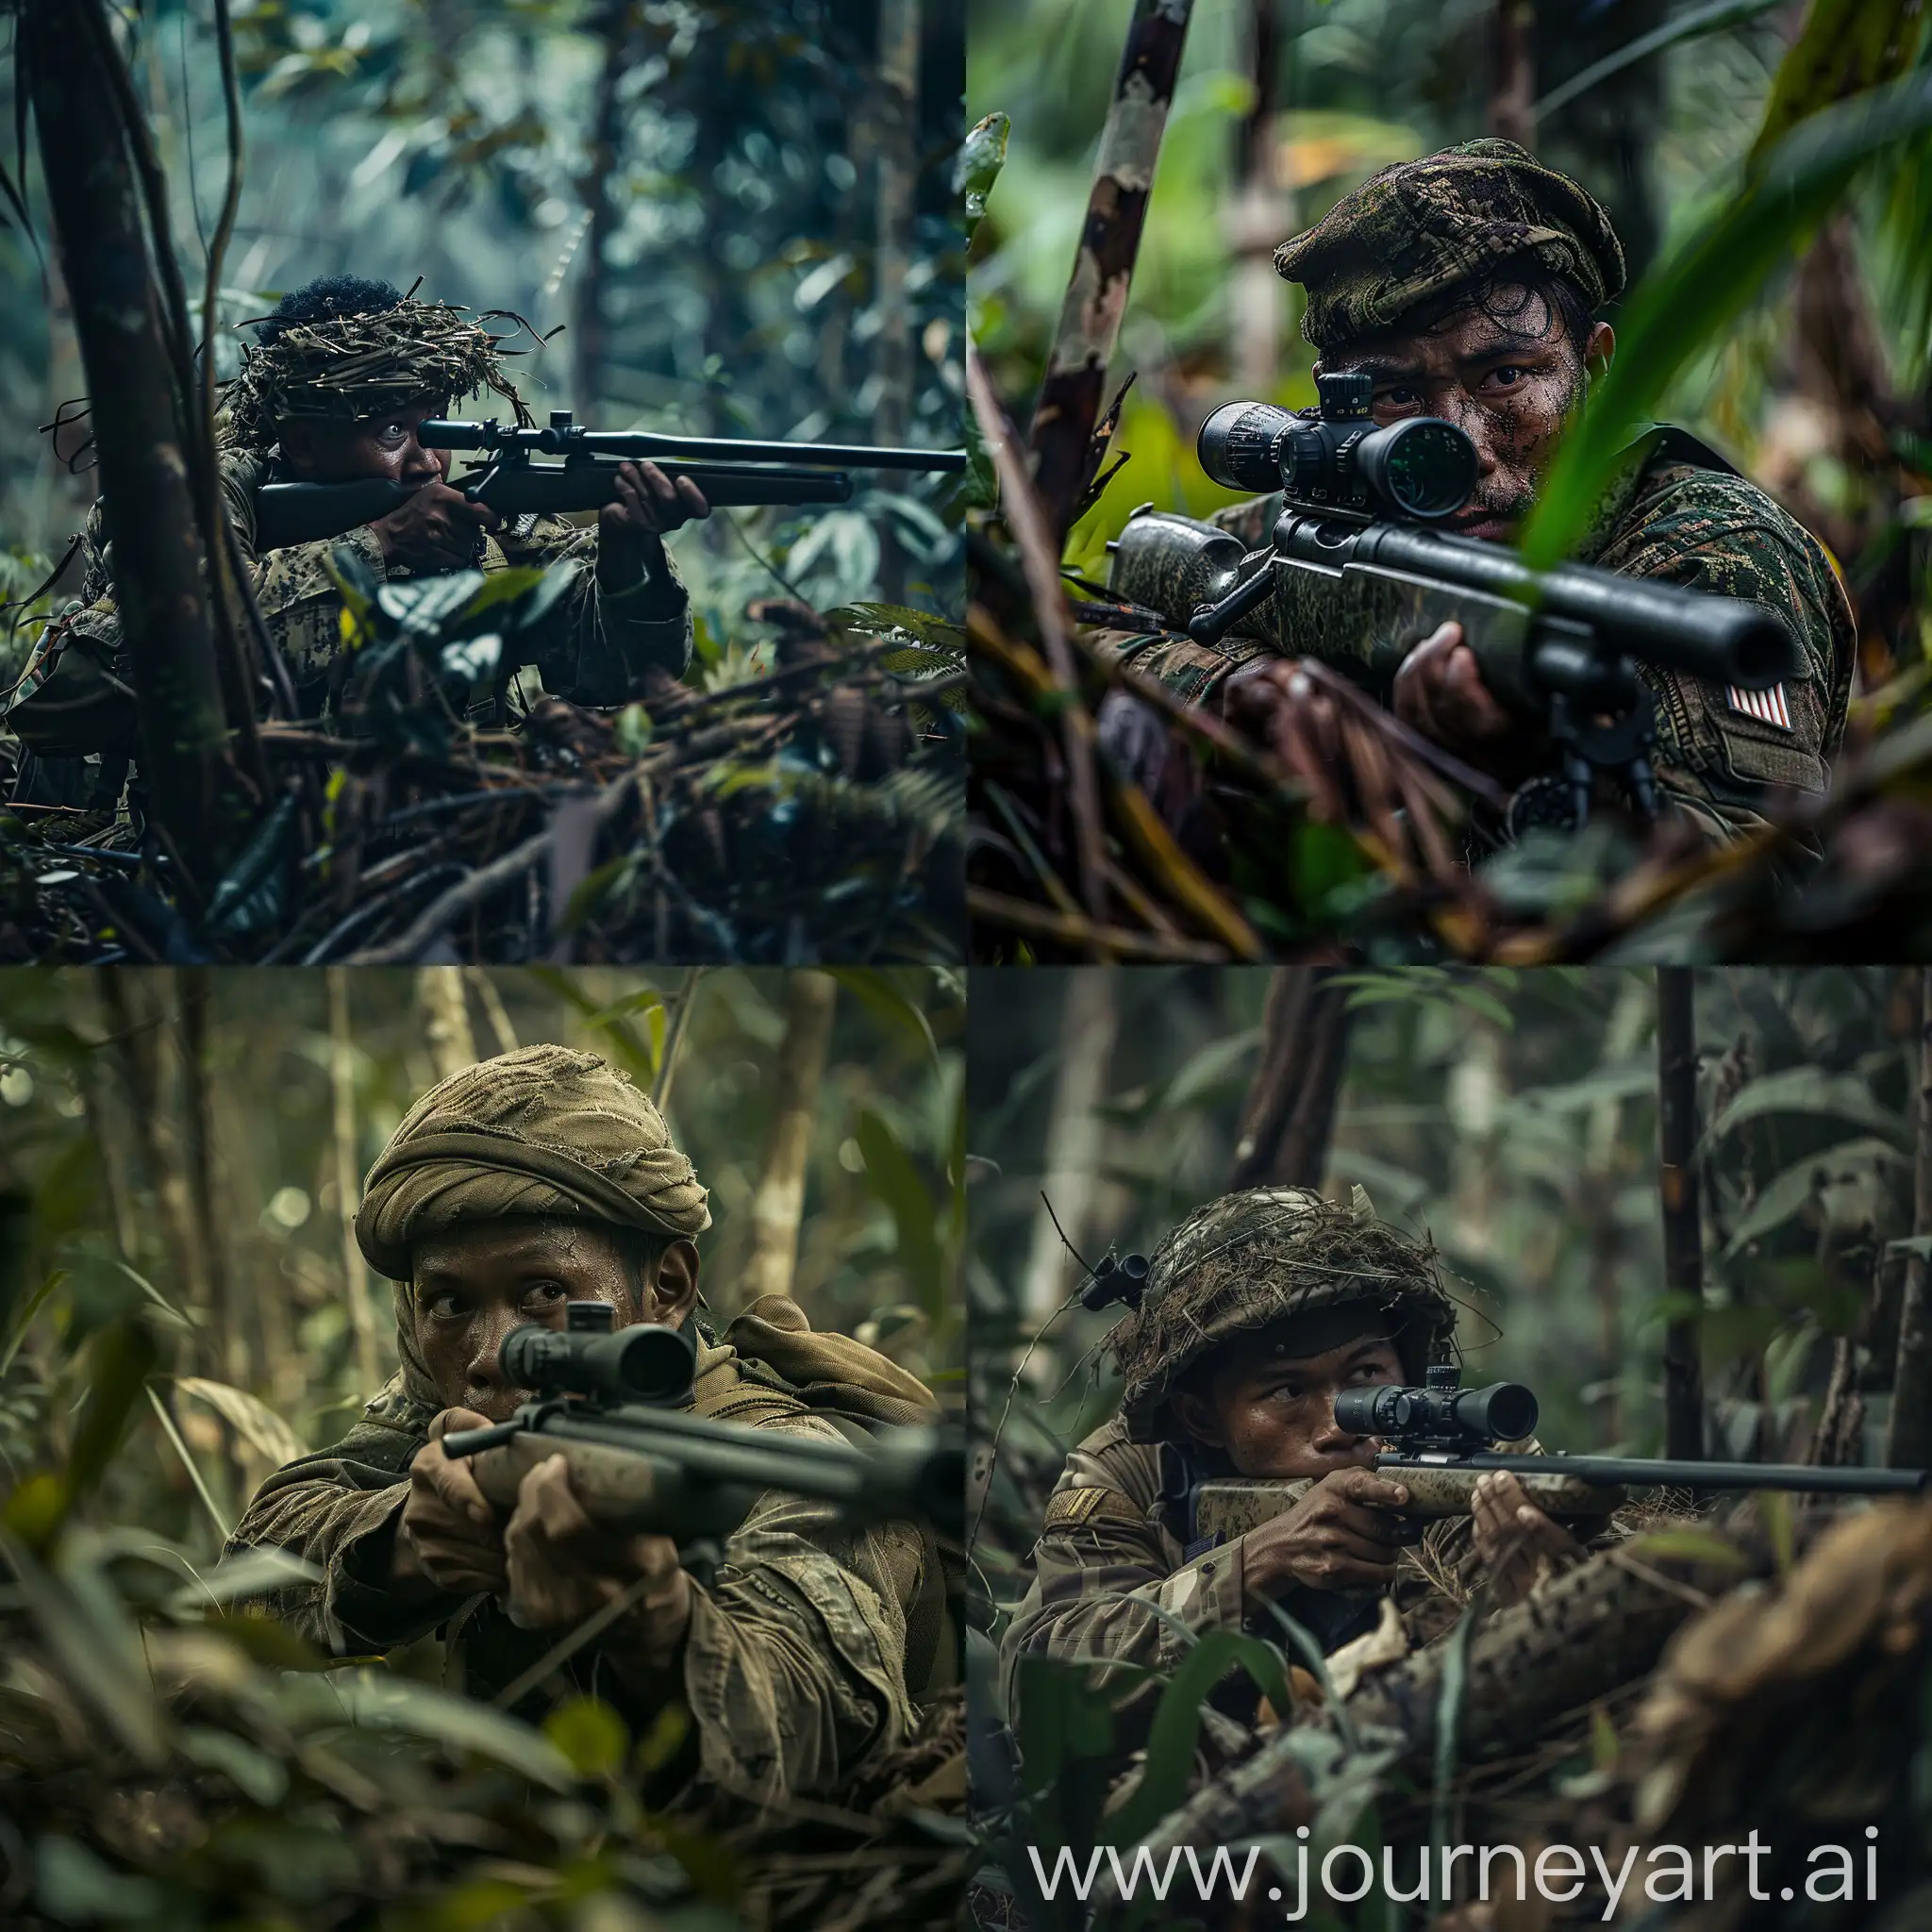 an Indonesian sniper soldier, aiming with a weapon in the Papuan forest, movie style